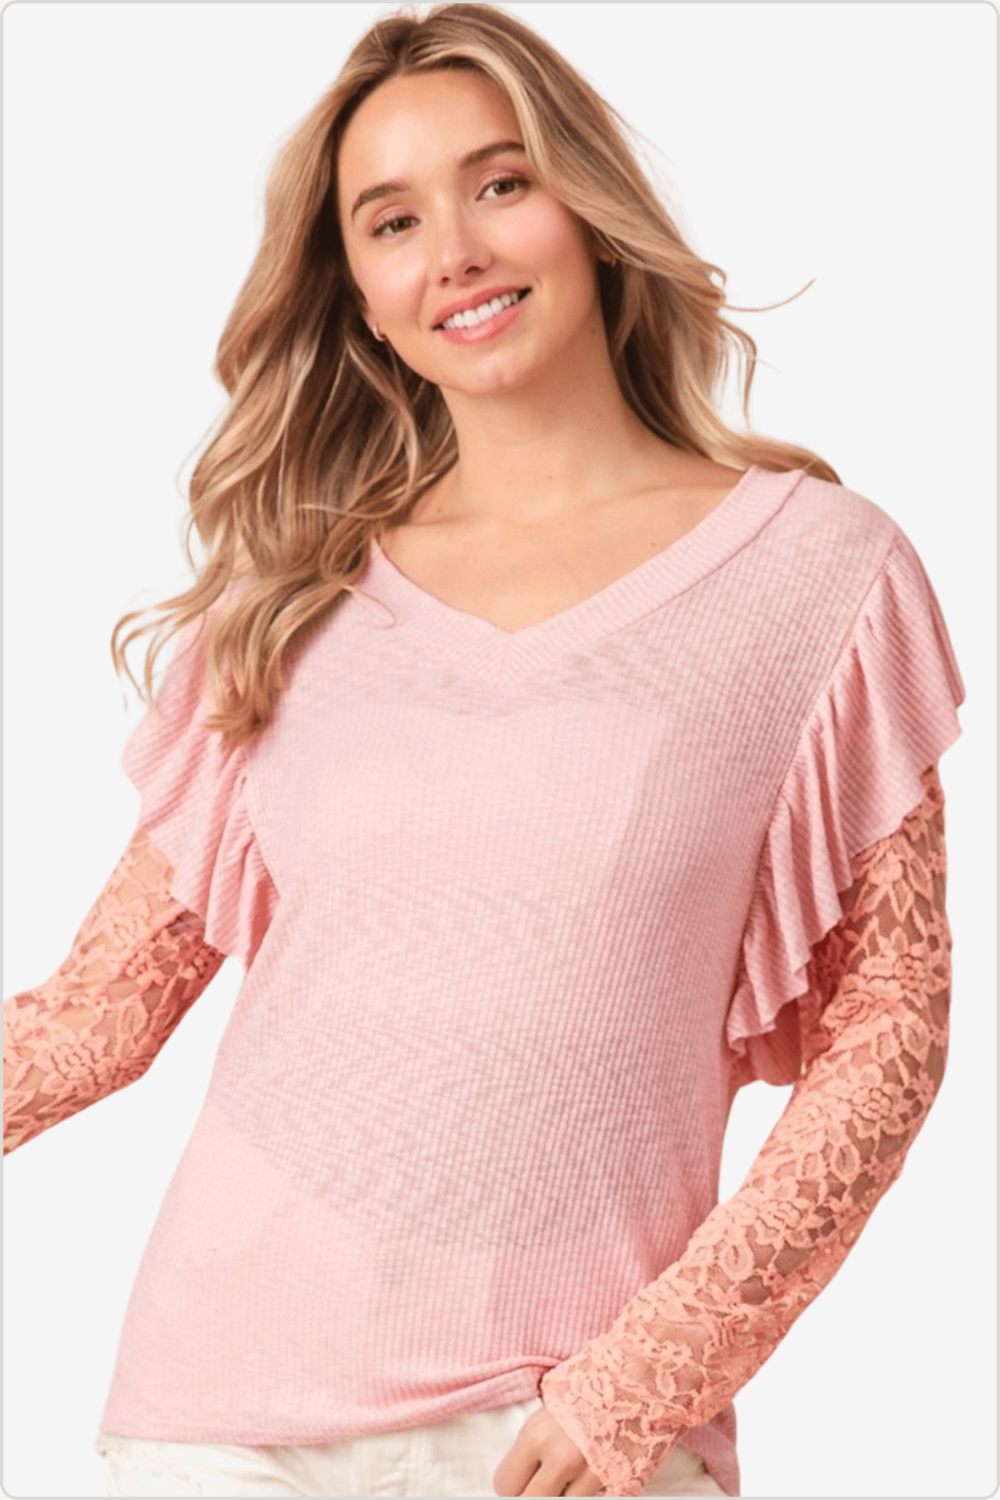 Smiling model in a pink rib knit top with v-neck and elegant ruffled lace sleeves.